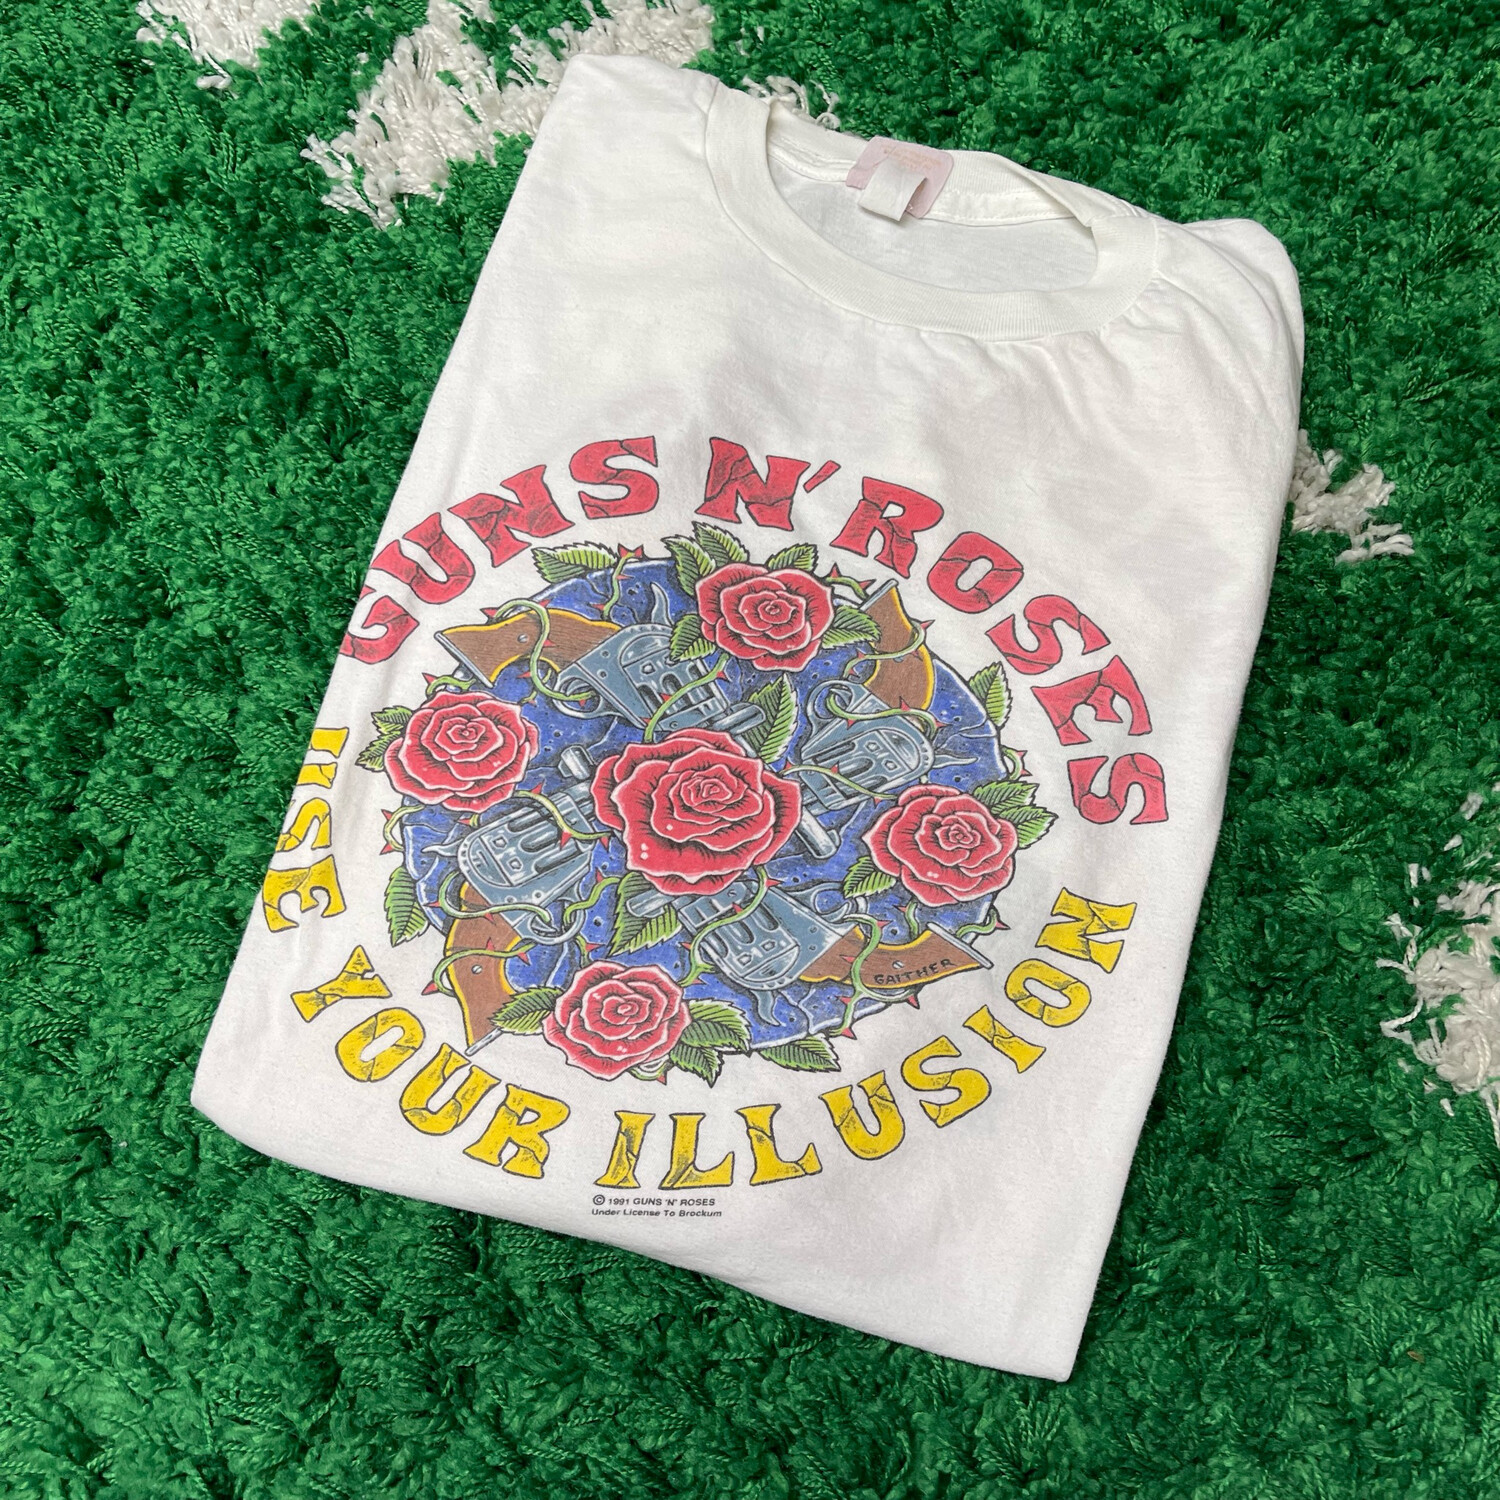 Guns N' Roses Use Your Illusions Tour Tee Size XL